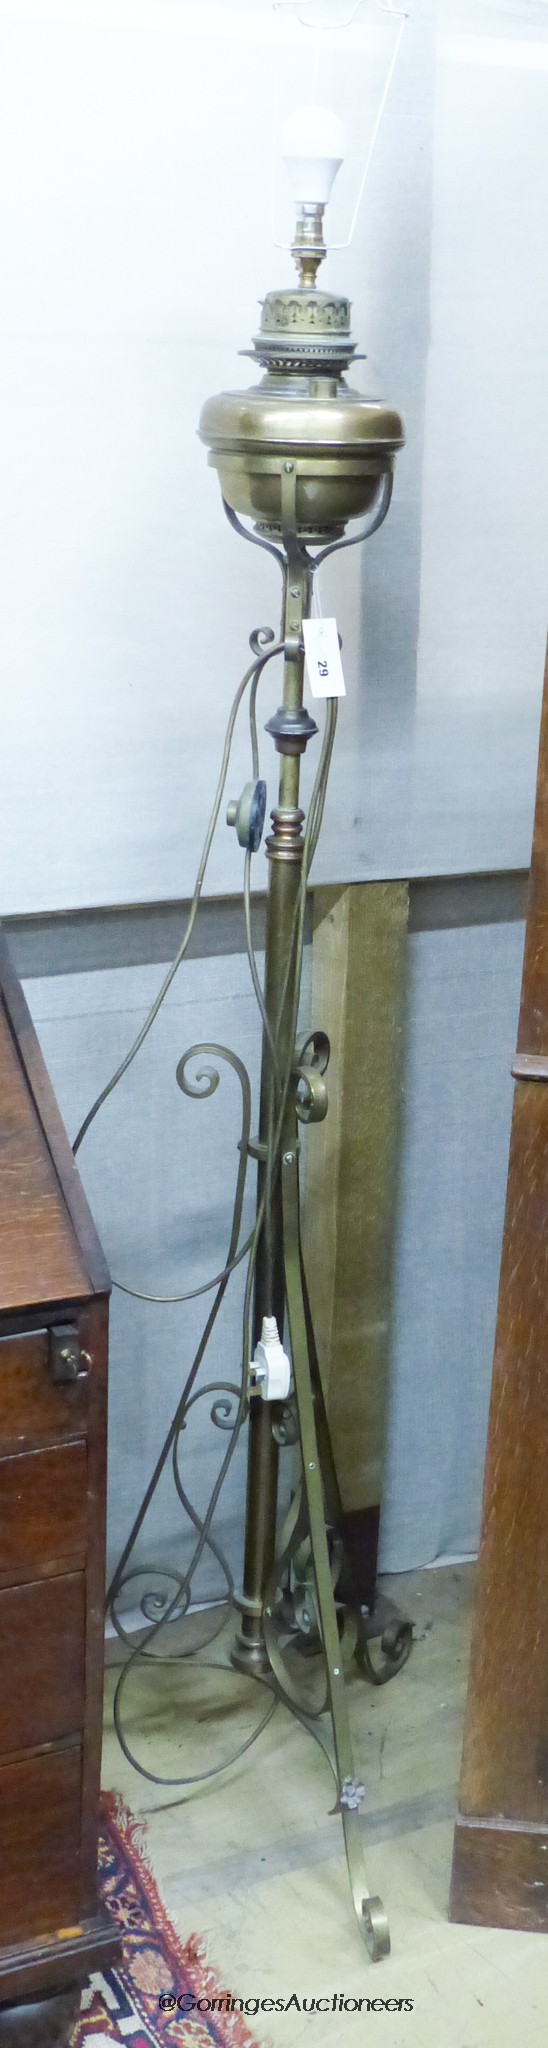 An Edwardian brass telescopic oil lamp standard converted to electricity                                                                                                                                                    